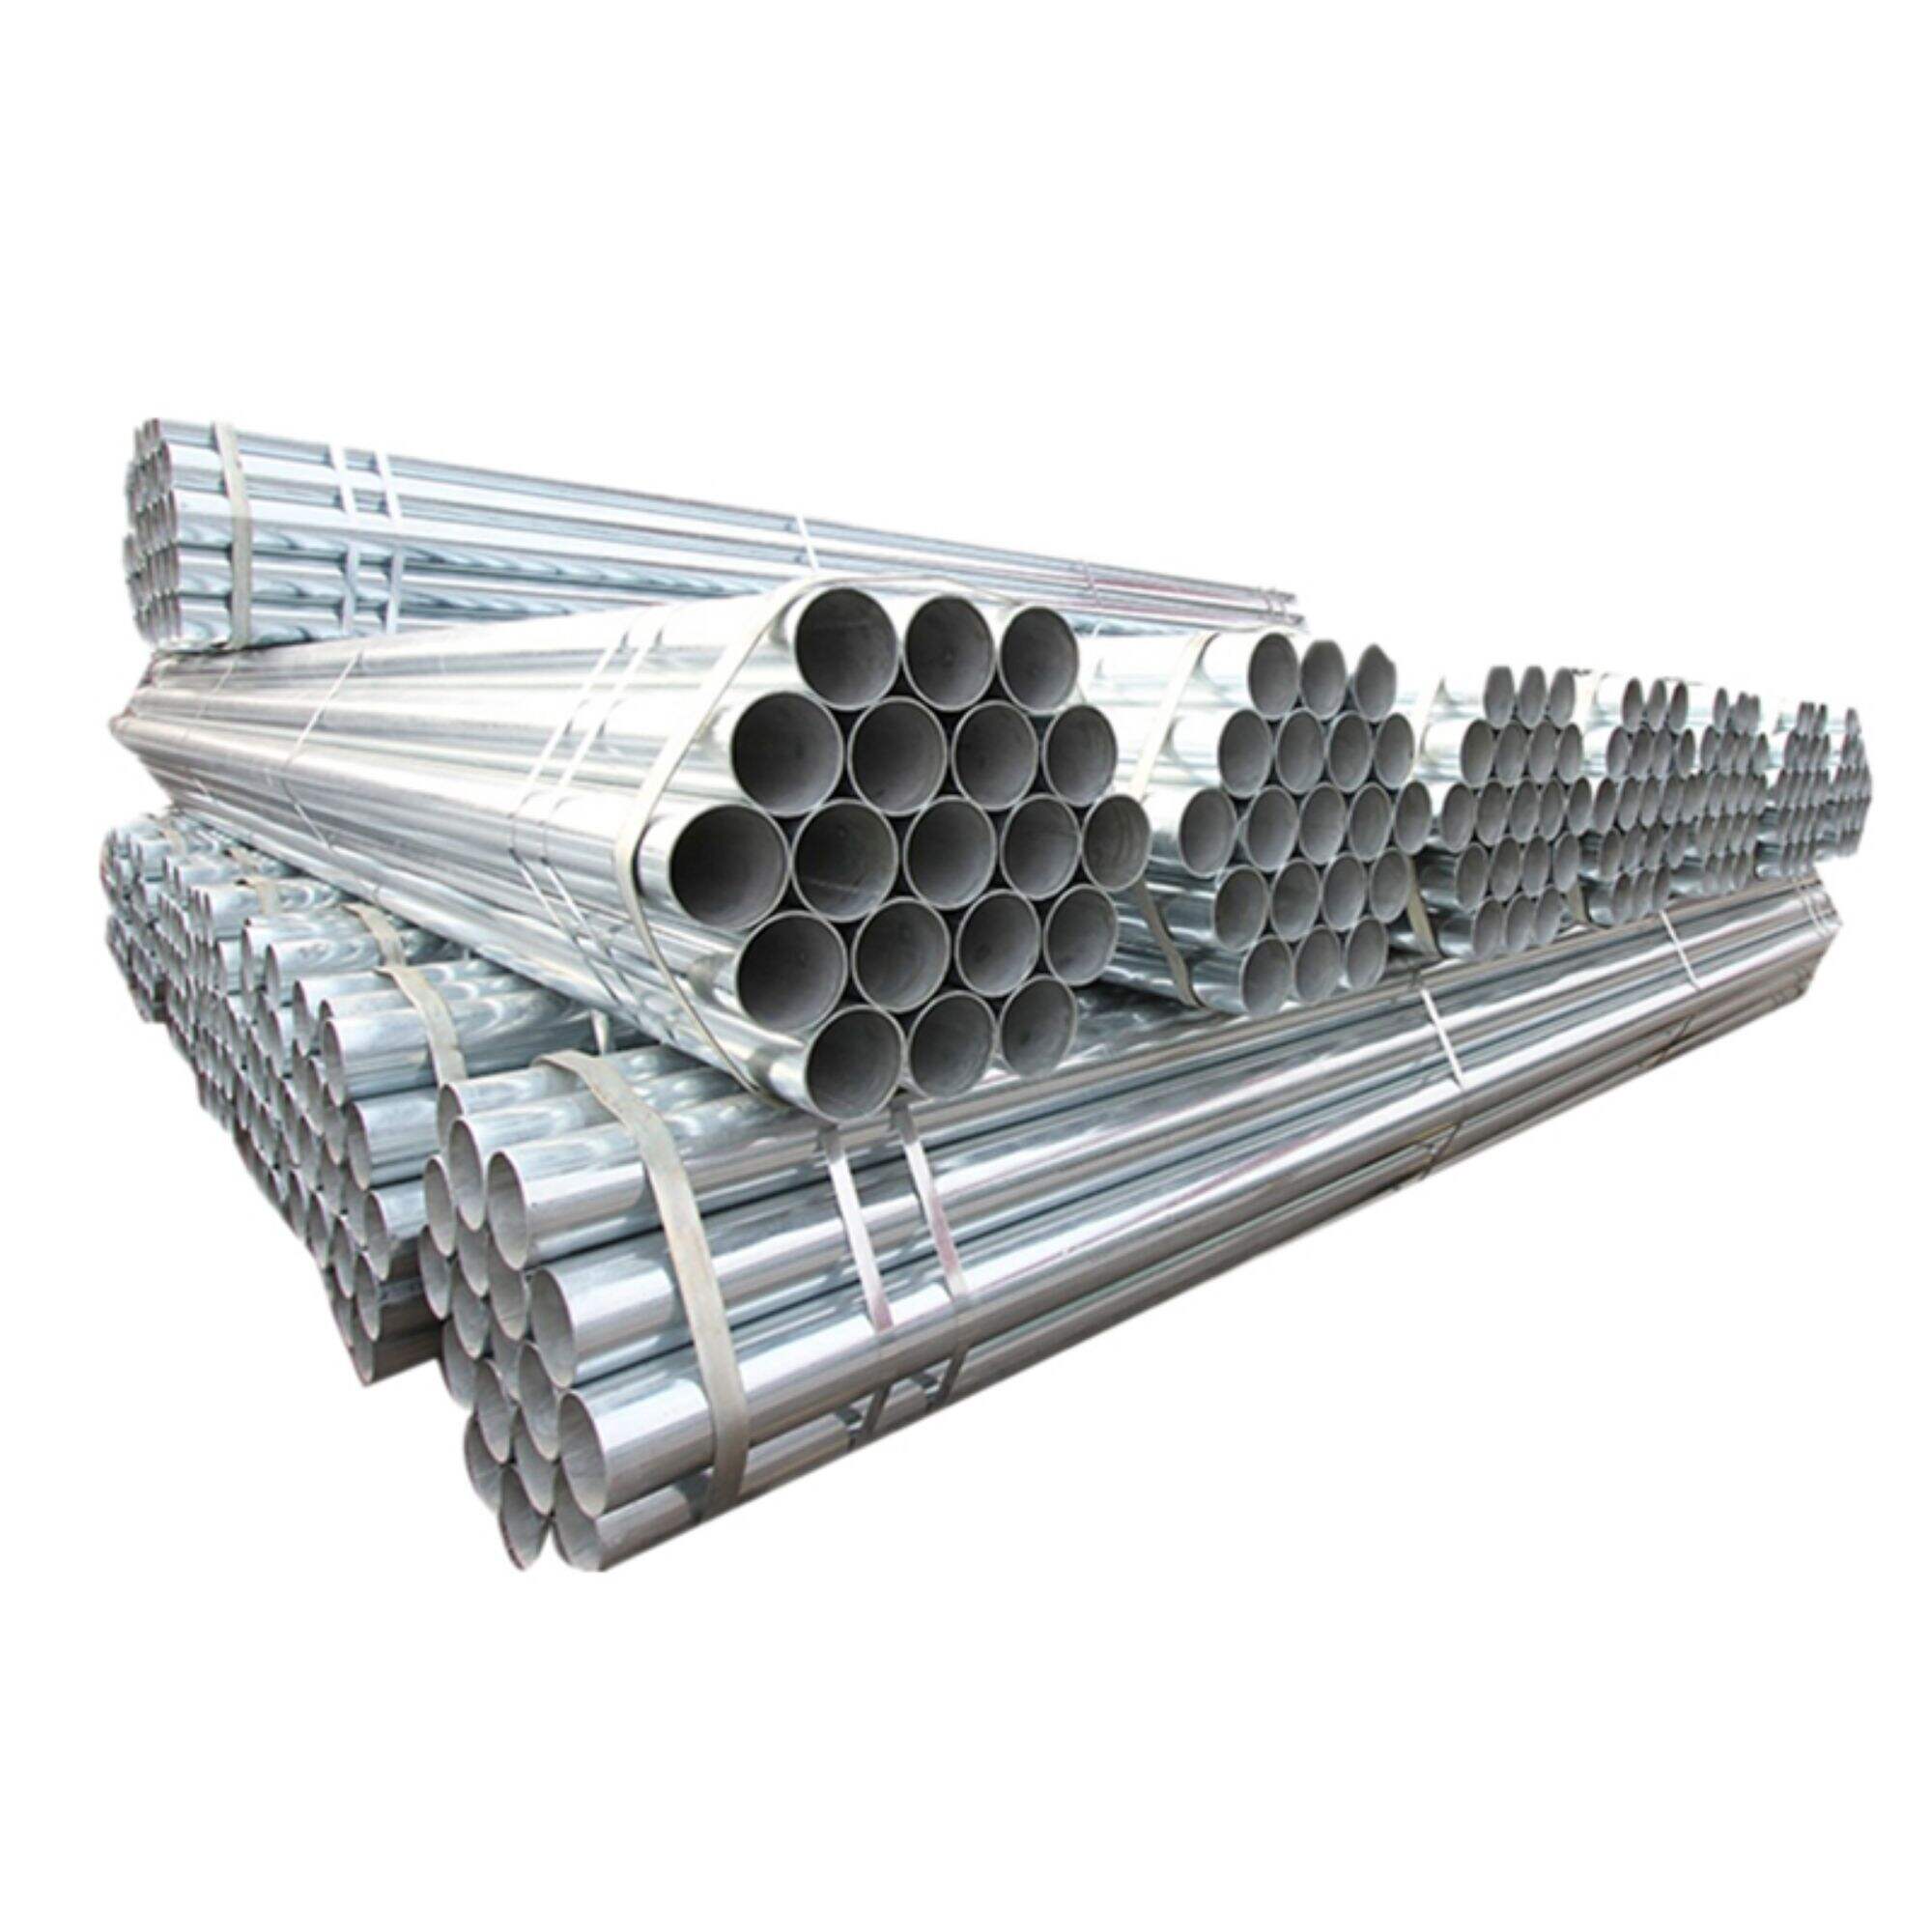 Low price round 12ft 16ft galvanized steel tube q345 hot-dipped galvanized steel pipe